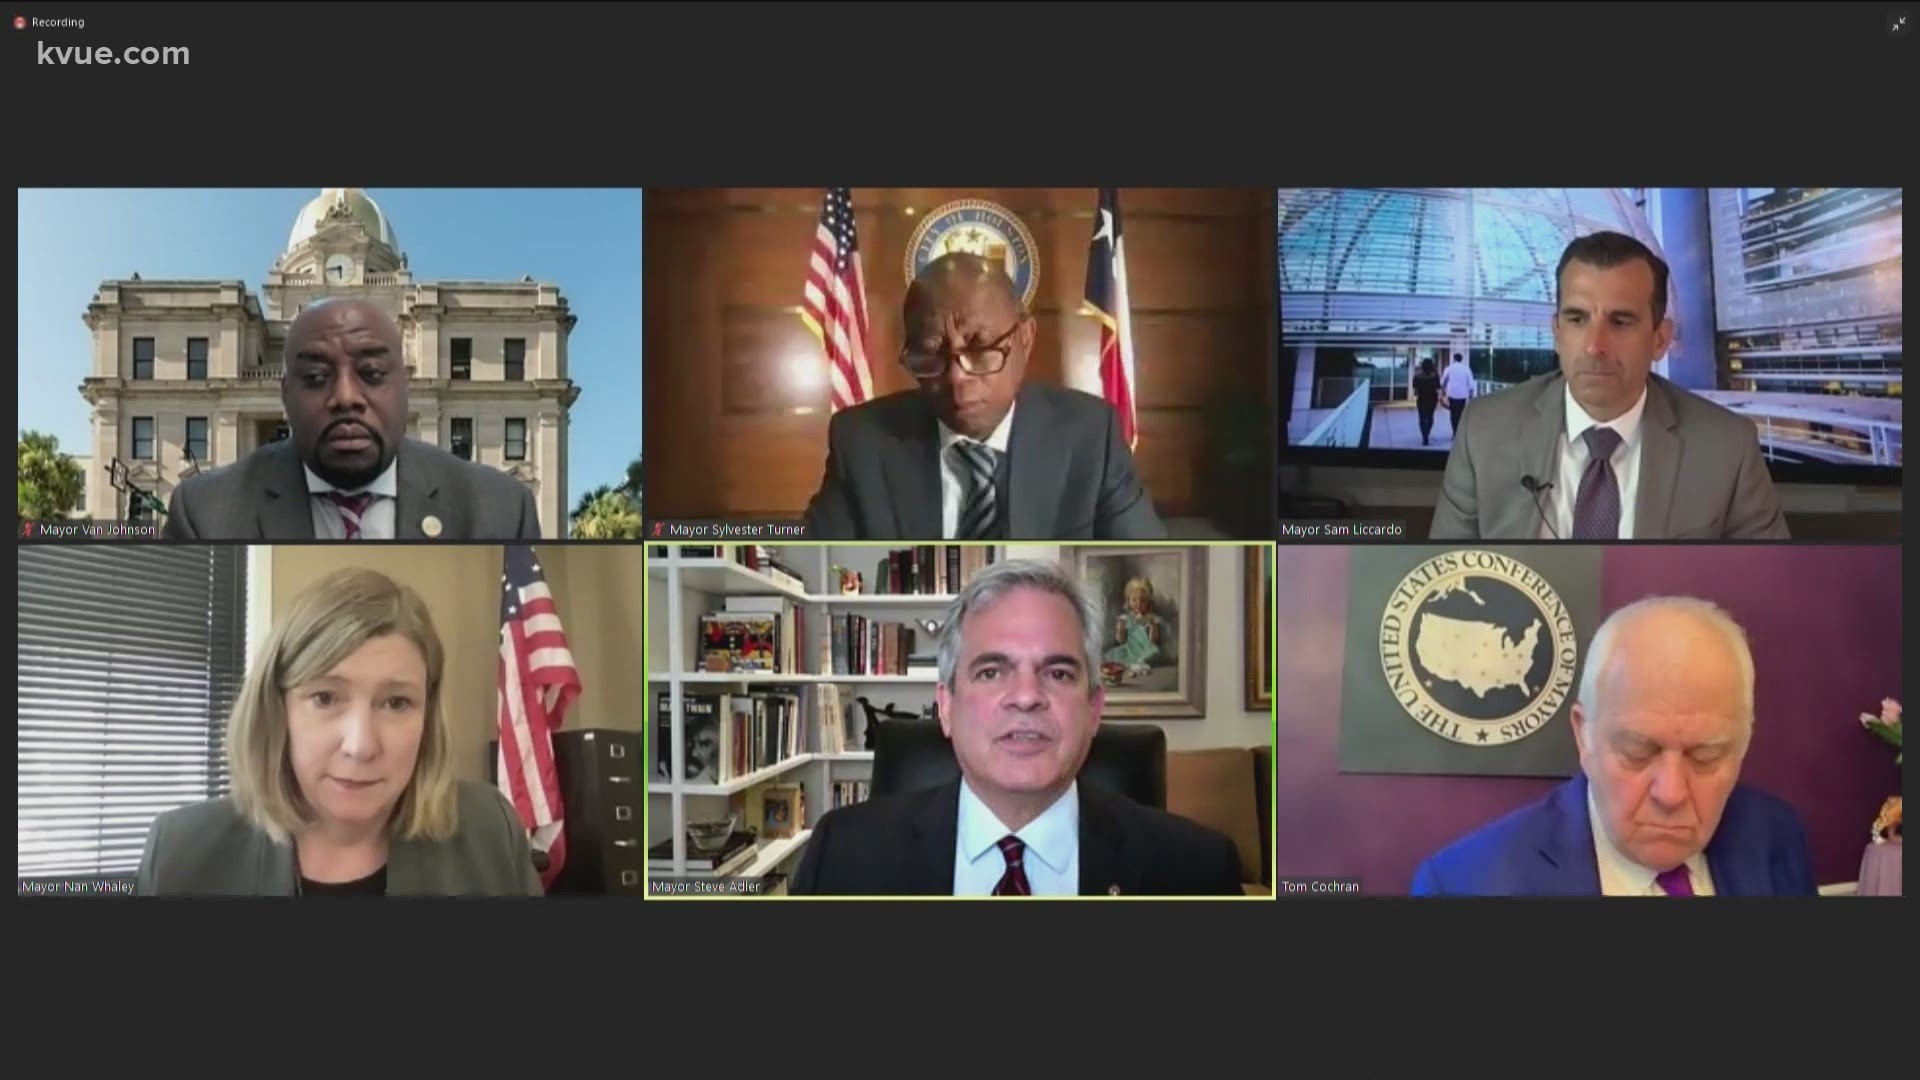 Austin Mayor Steve Adler was joined by mayors from across the nation to make the call.